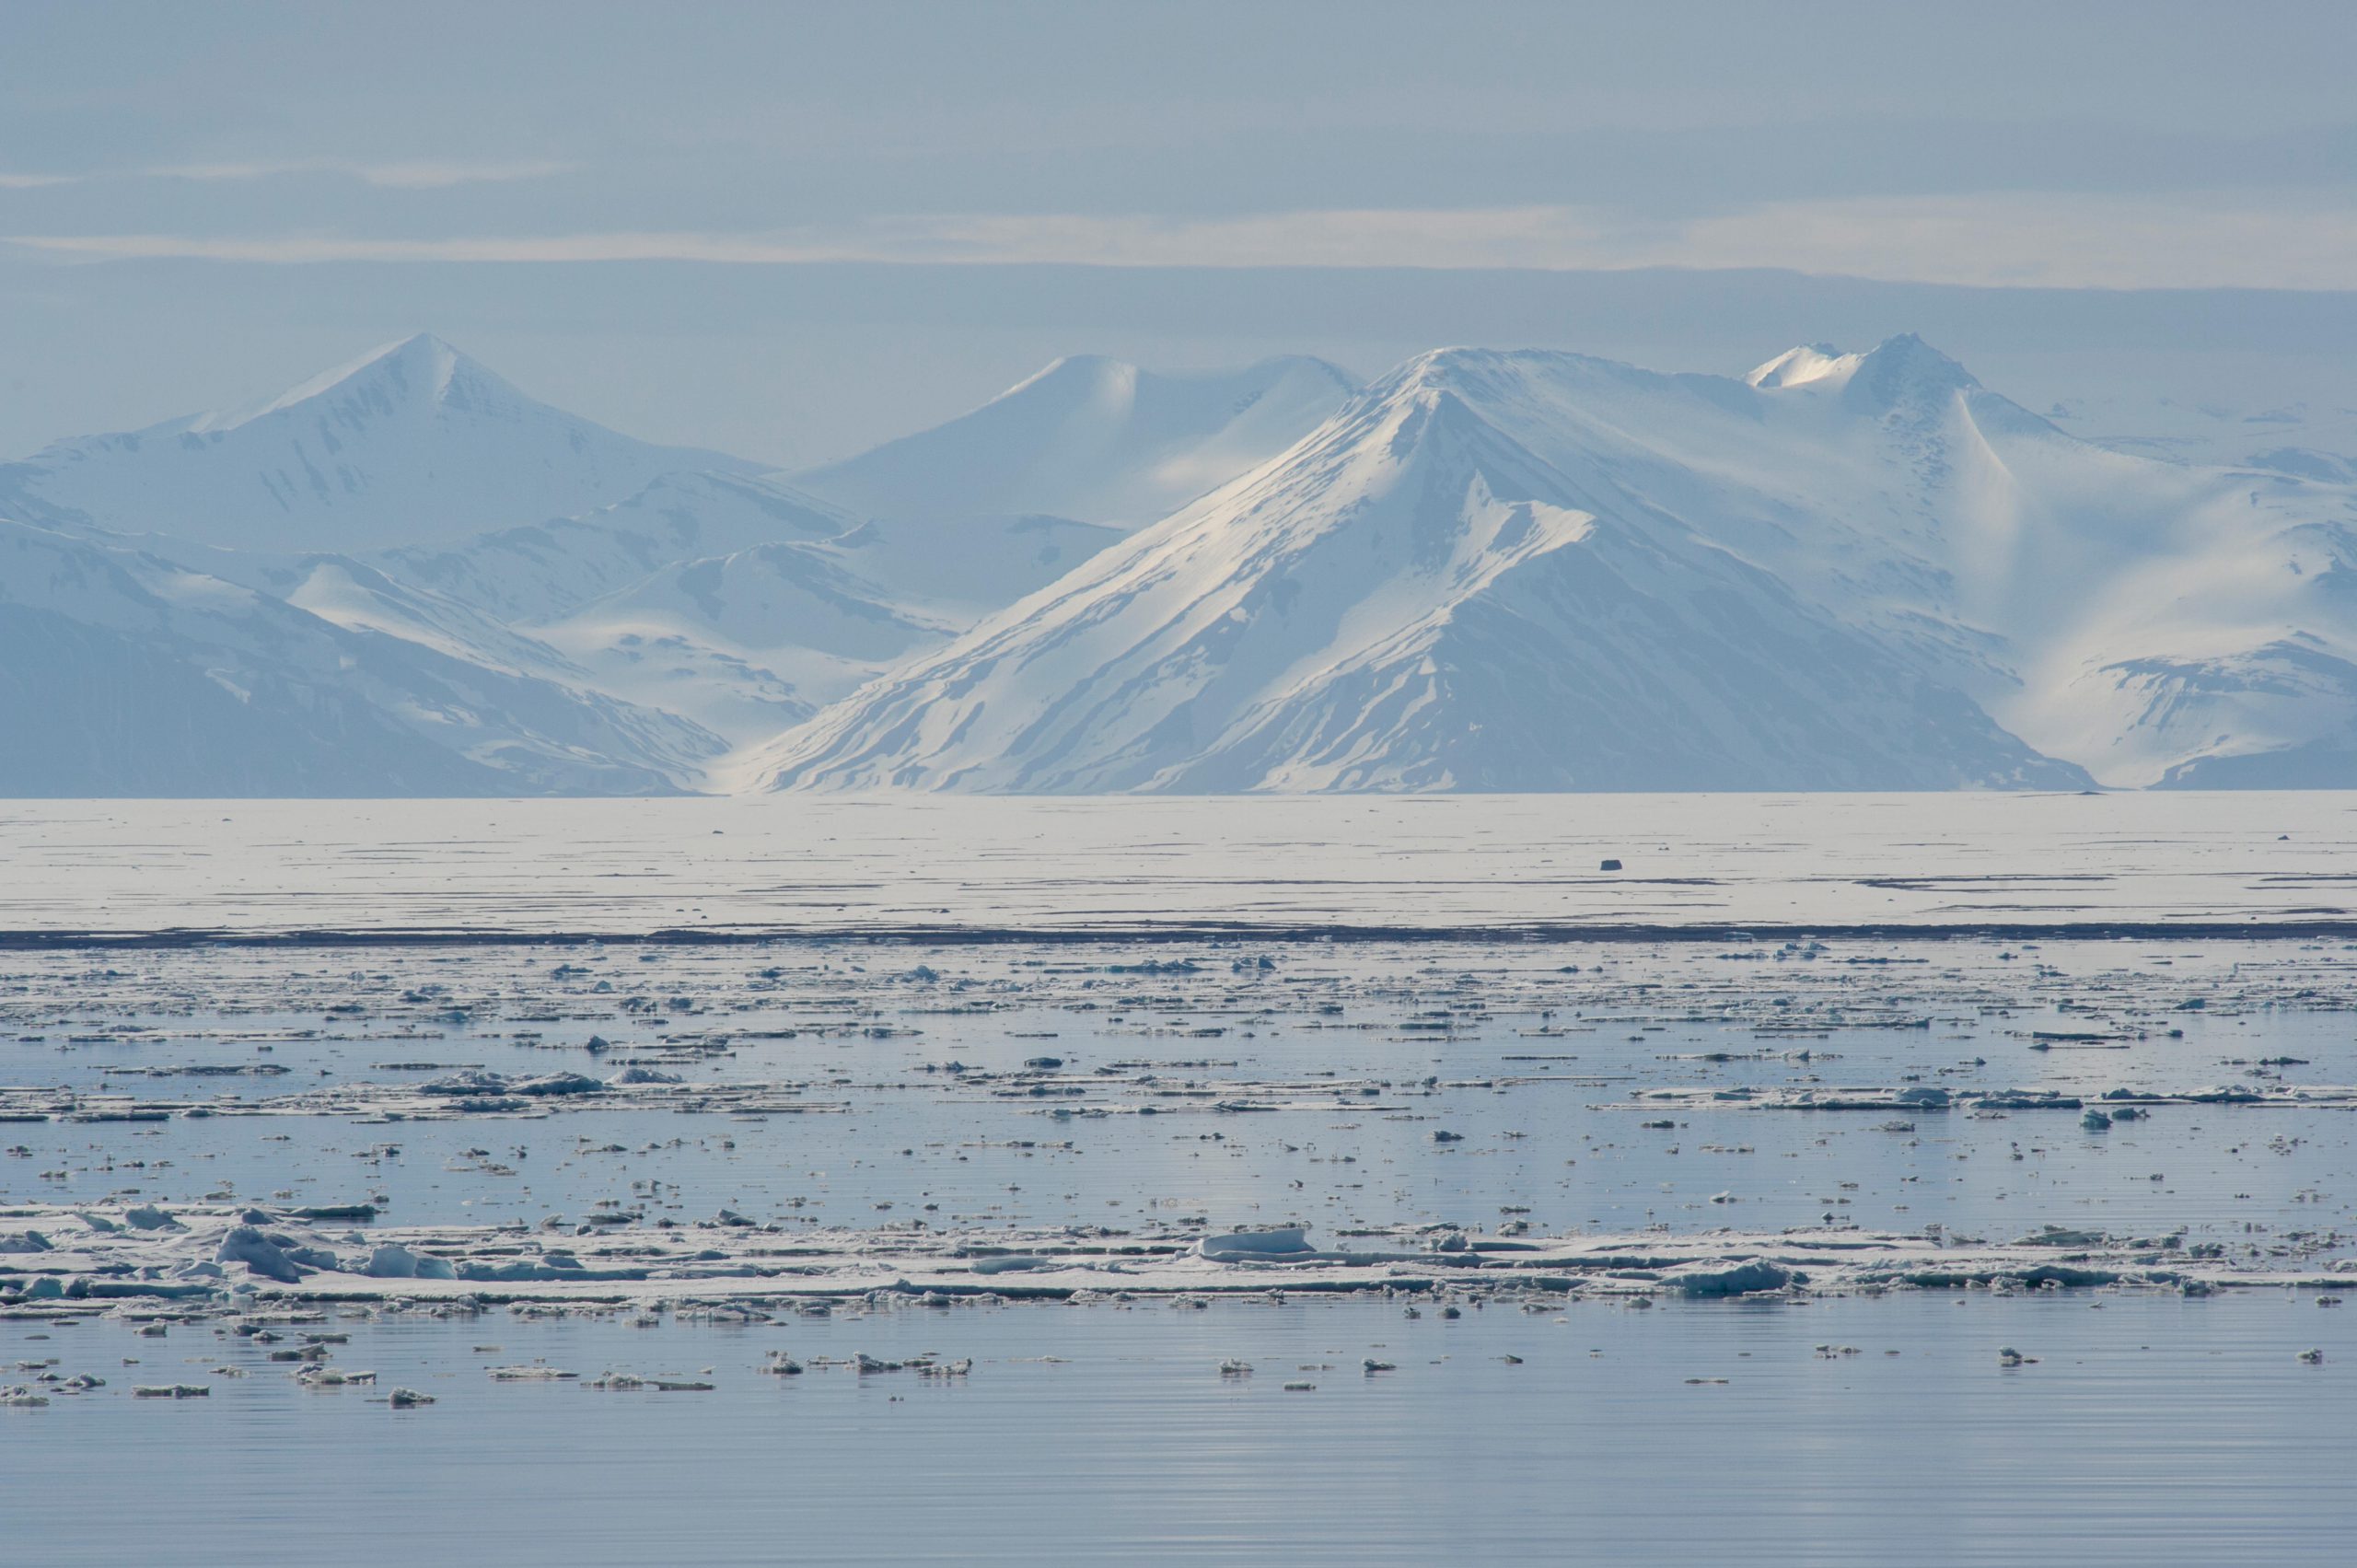 The sea ice and mountains in Spitsbergen, Svalbard during the Arctic summer [Image by: Josh Harrison/Alamy]